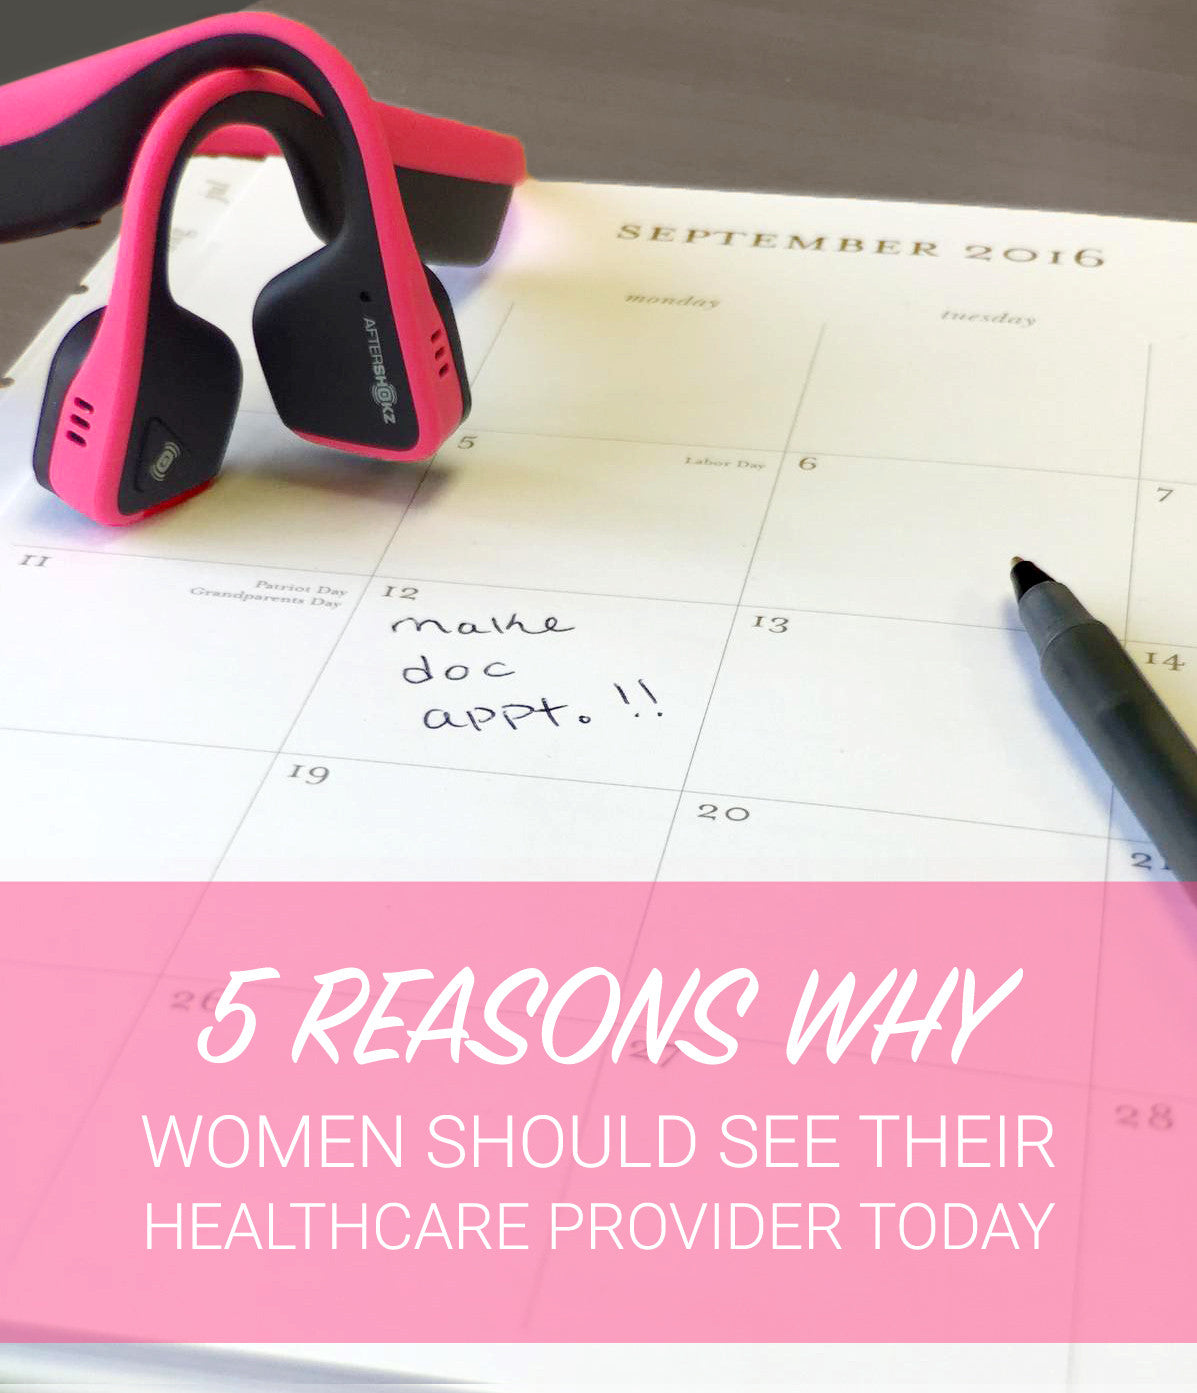 5 Reasons Why Women Should Make Routine Doctor Visits